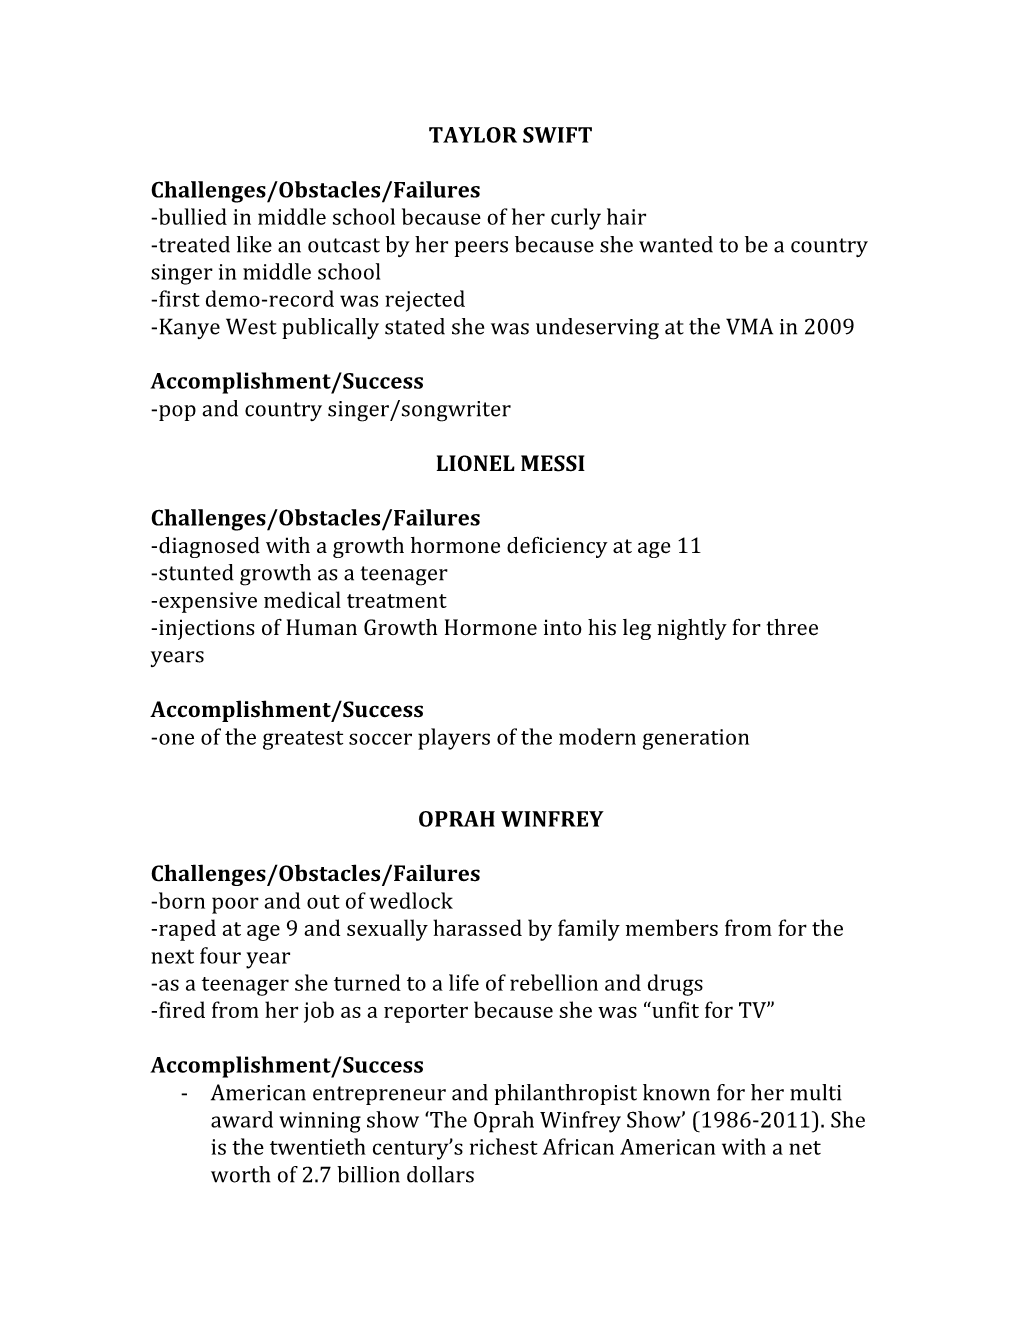 TAYLOR SWIFT Challenges/Obstacles/Failures